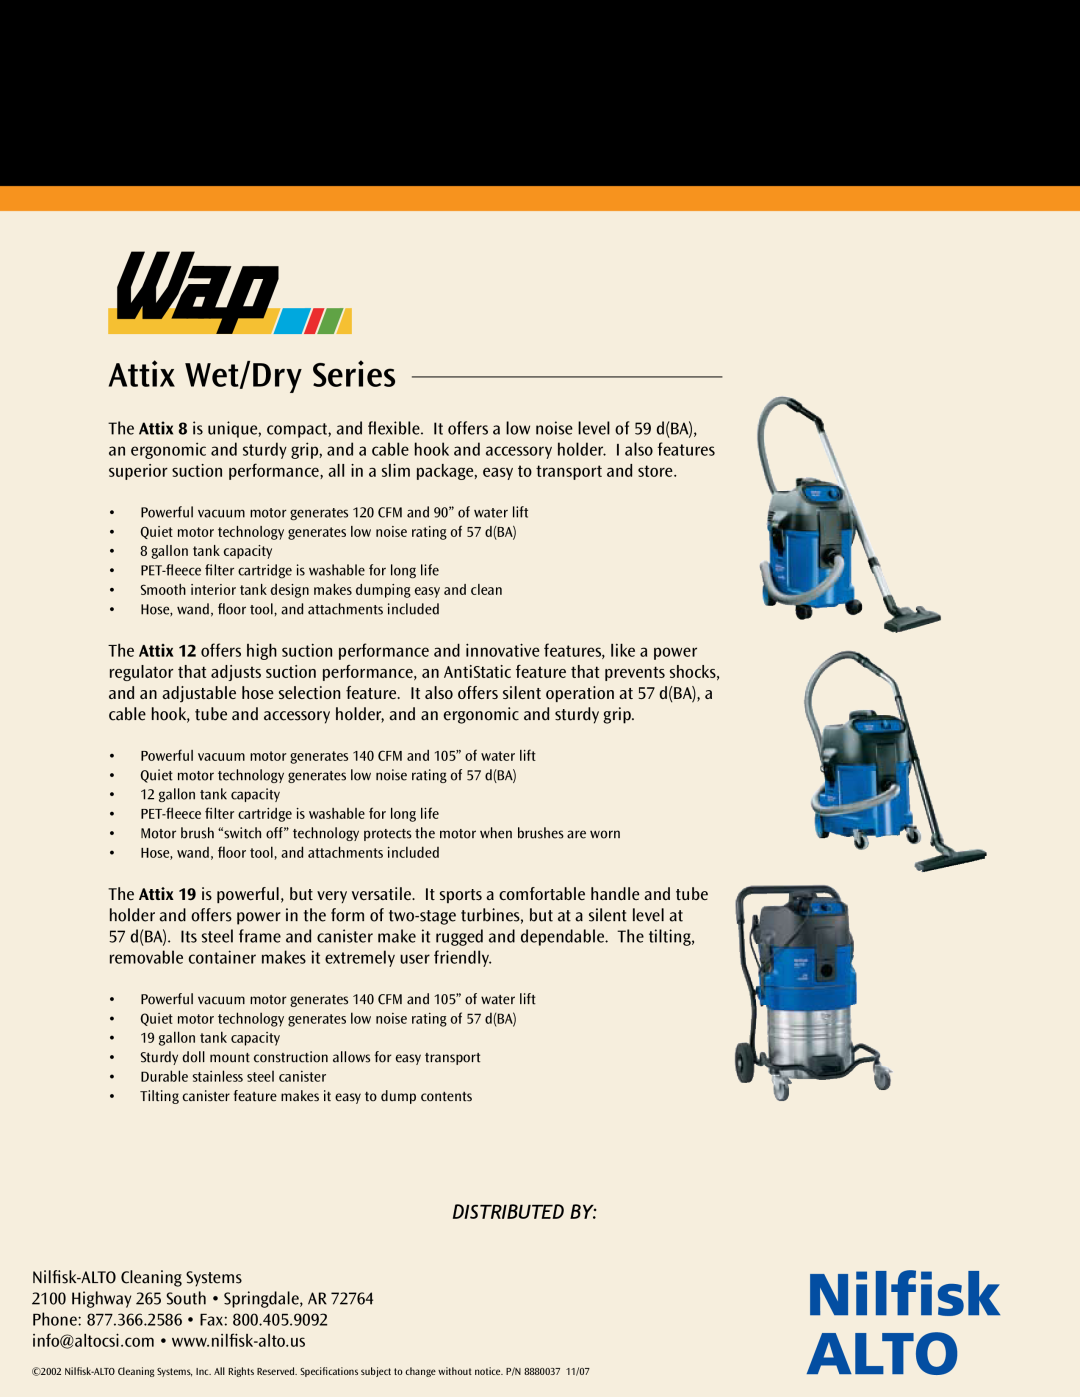 Nilfisk-ALTO Attix Series manual Attix Wet/Dry Series, Distributed By, Nilfisk-ALTOCleaning Systems 